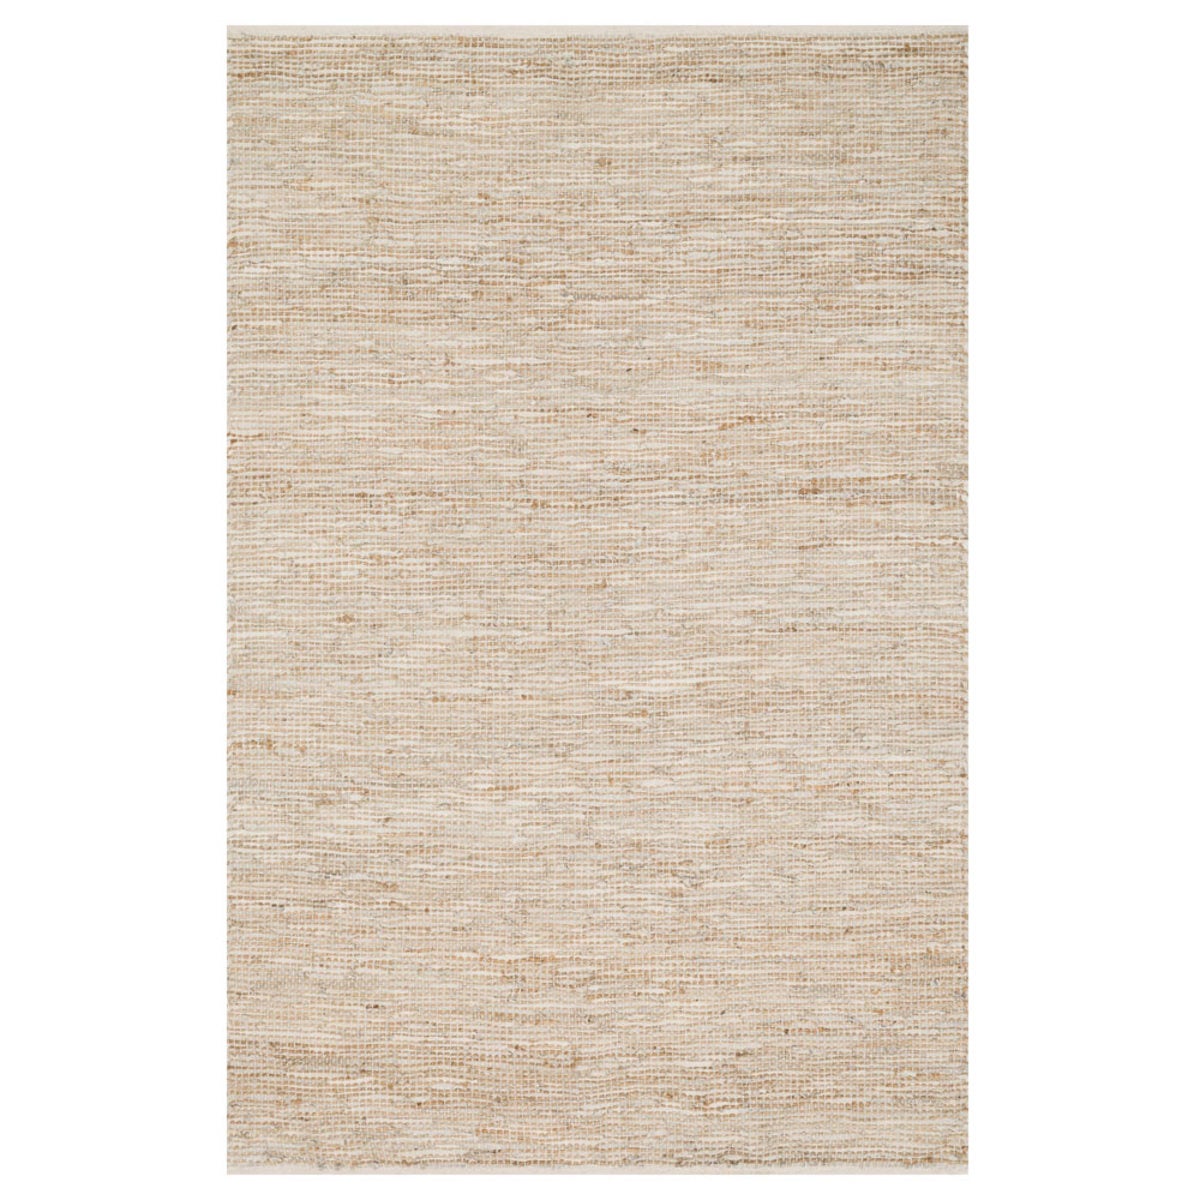 Loloi Edge Leather & Jute Rug in Brown - 7'9" x 9'9"  - Ivory